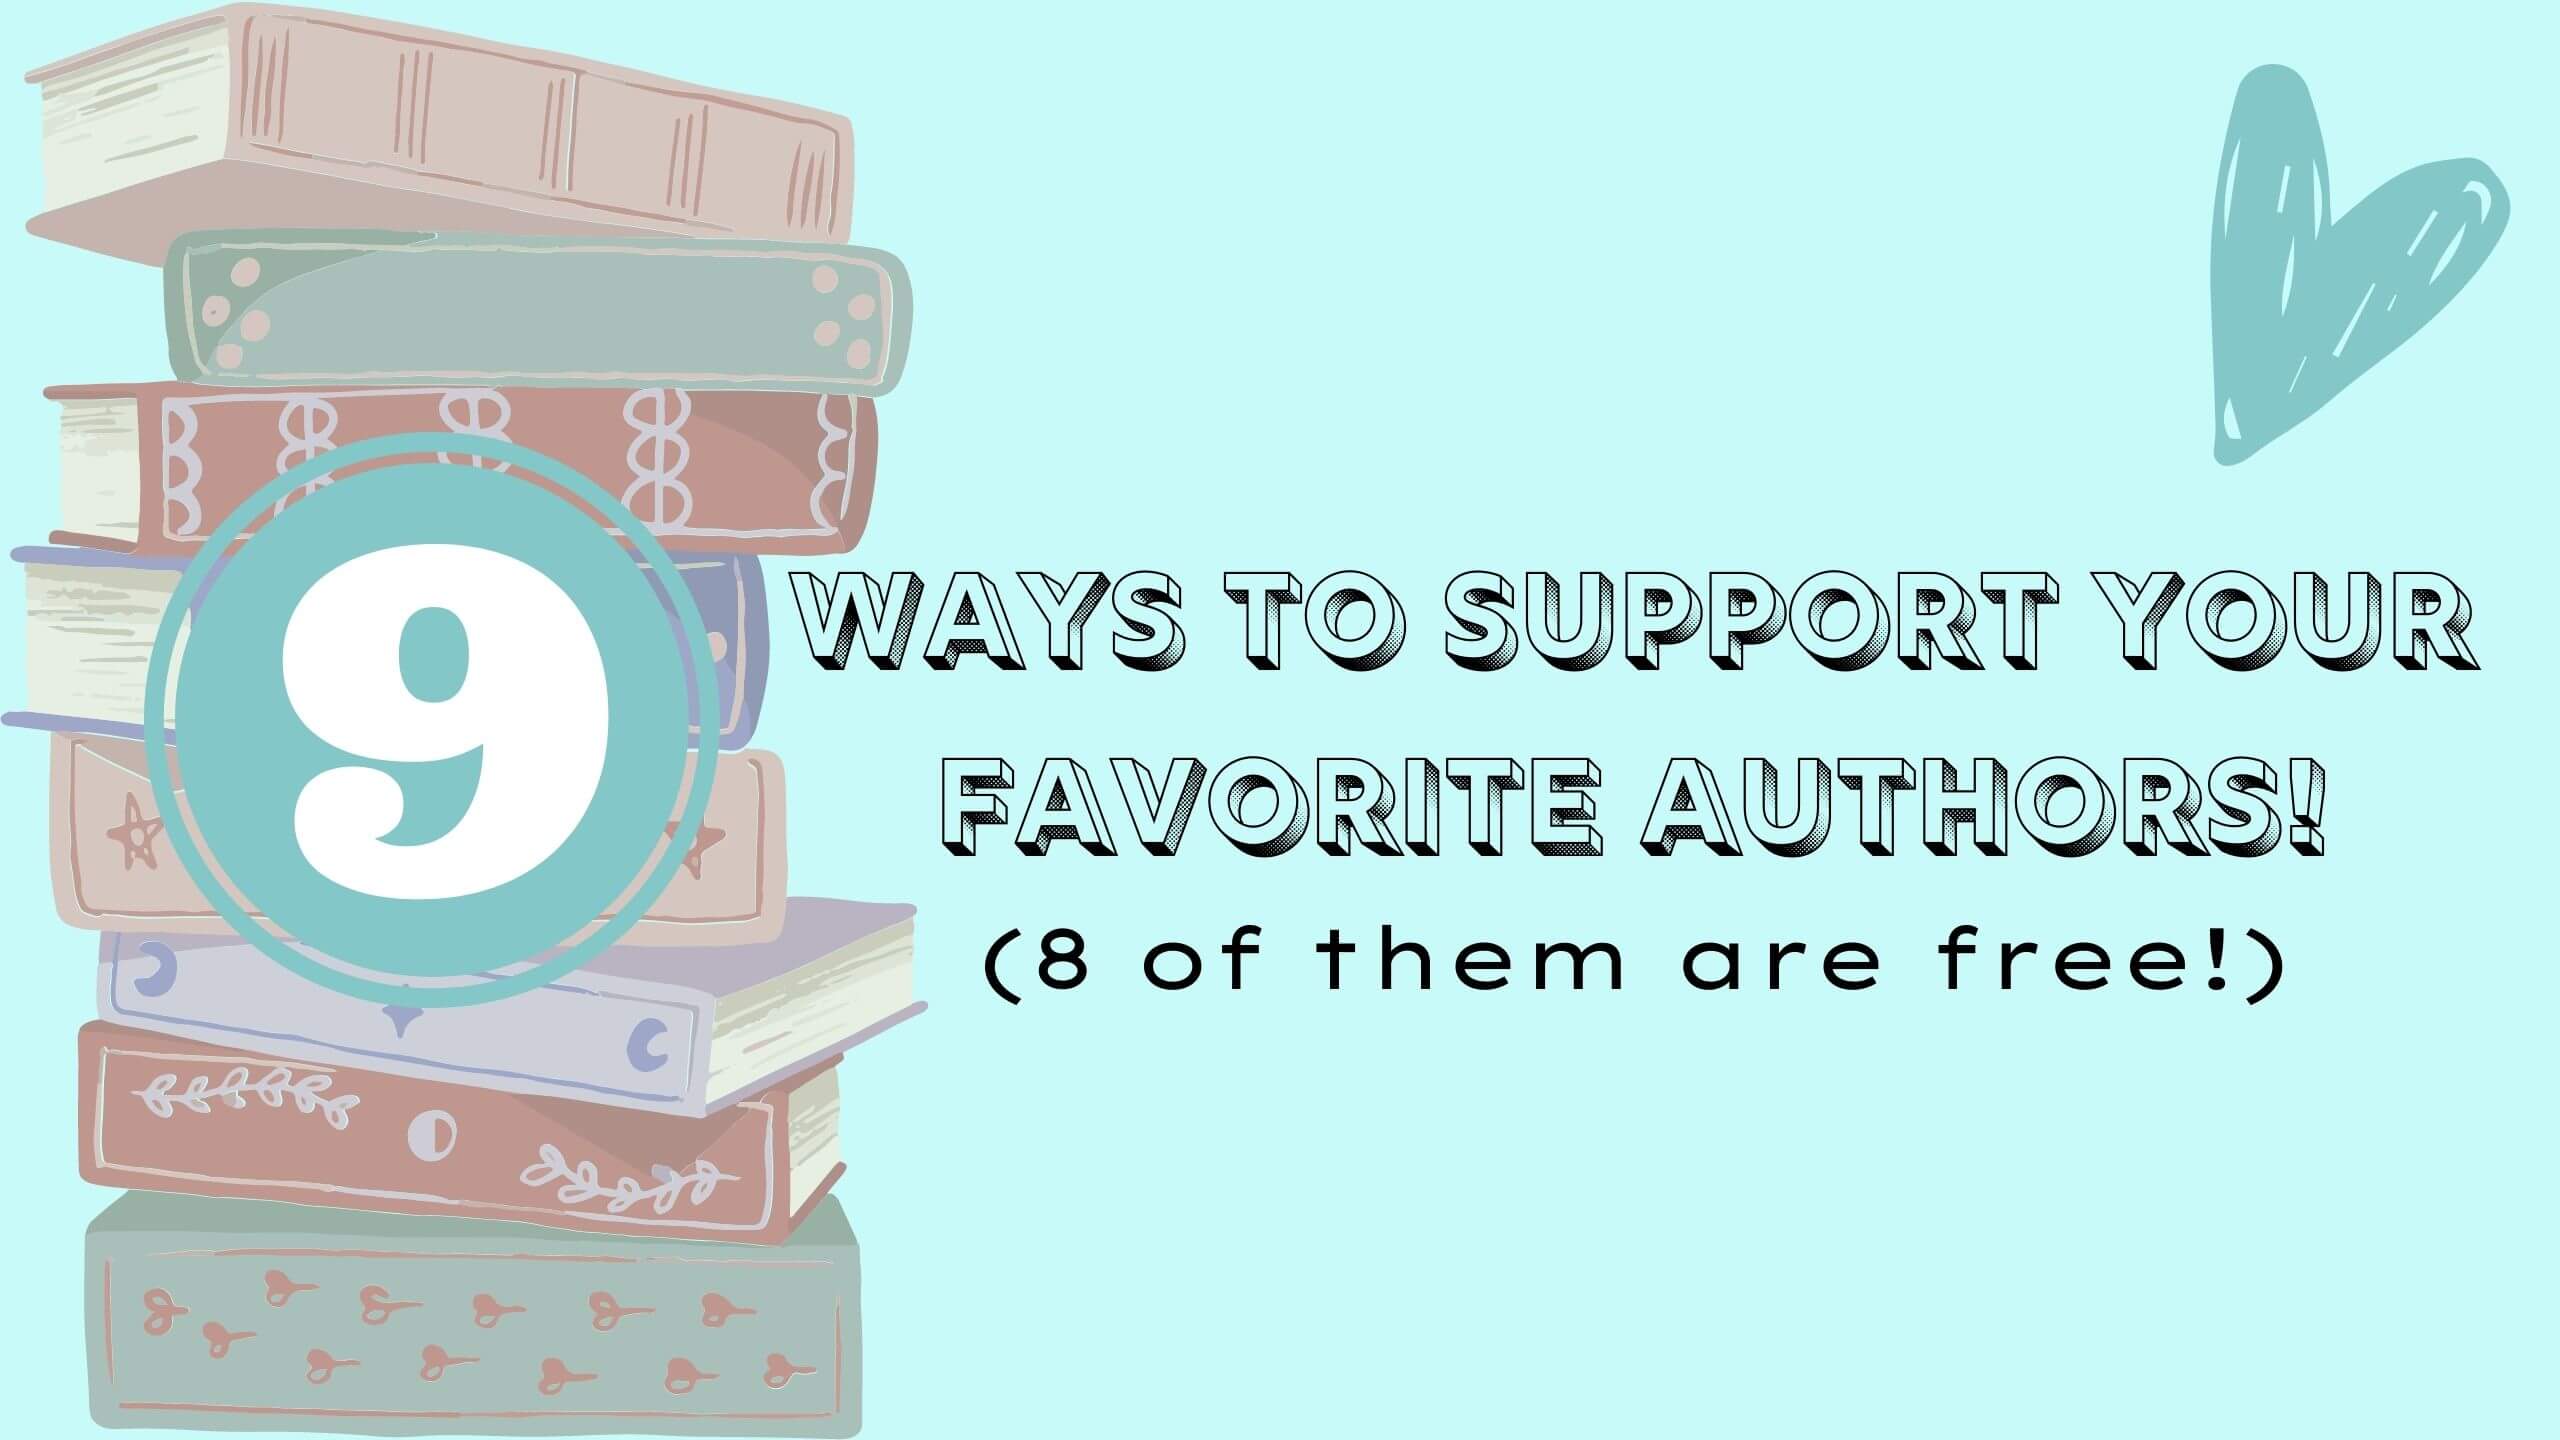 9 ways to support your favorite authors (8 of them are free!)